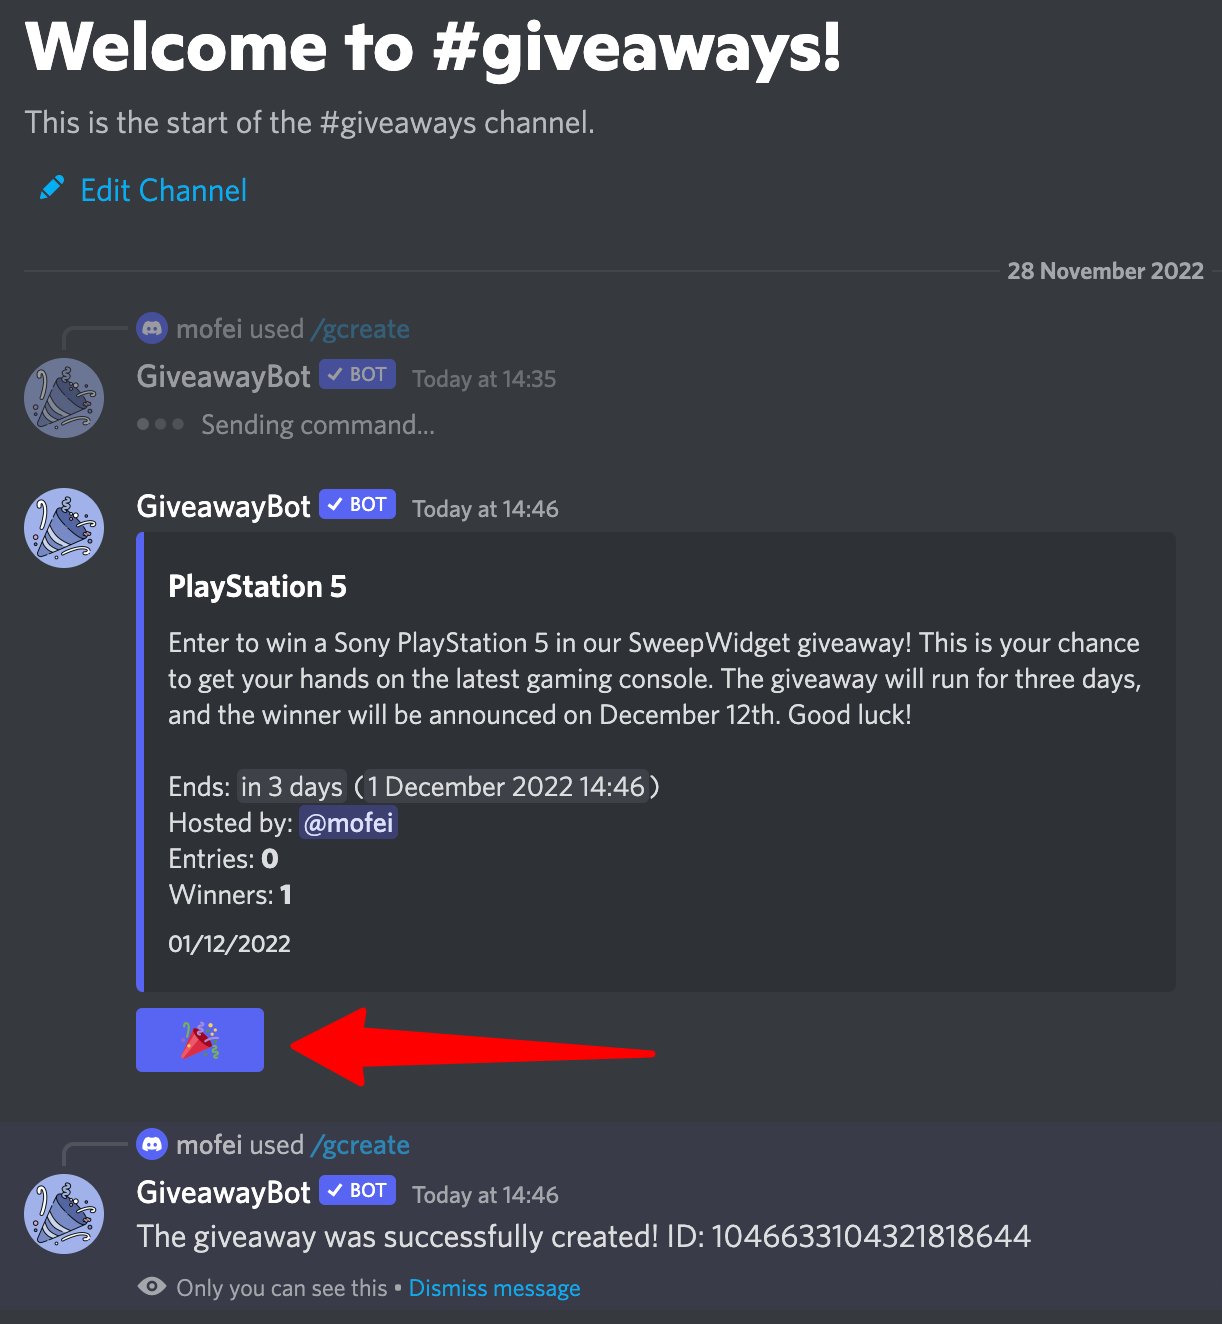 Giveaway Bot - Giveaway Bot updated their profile picture.